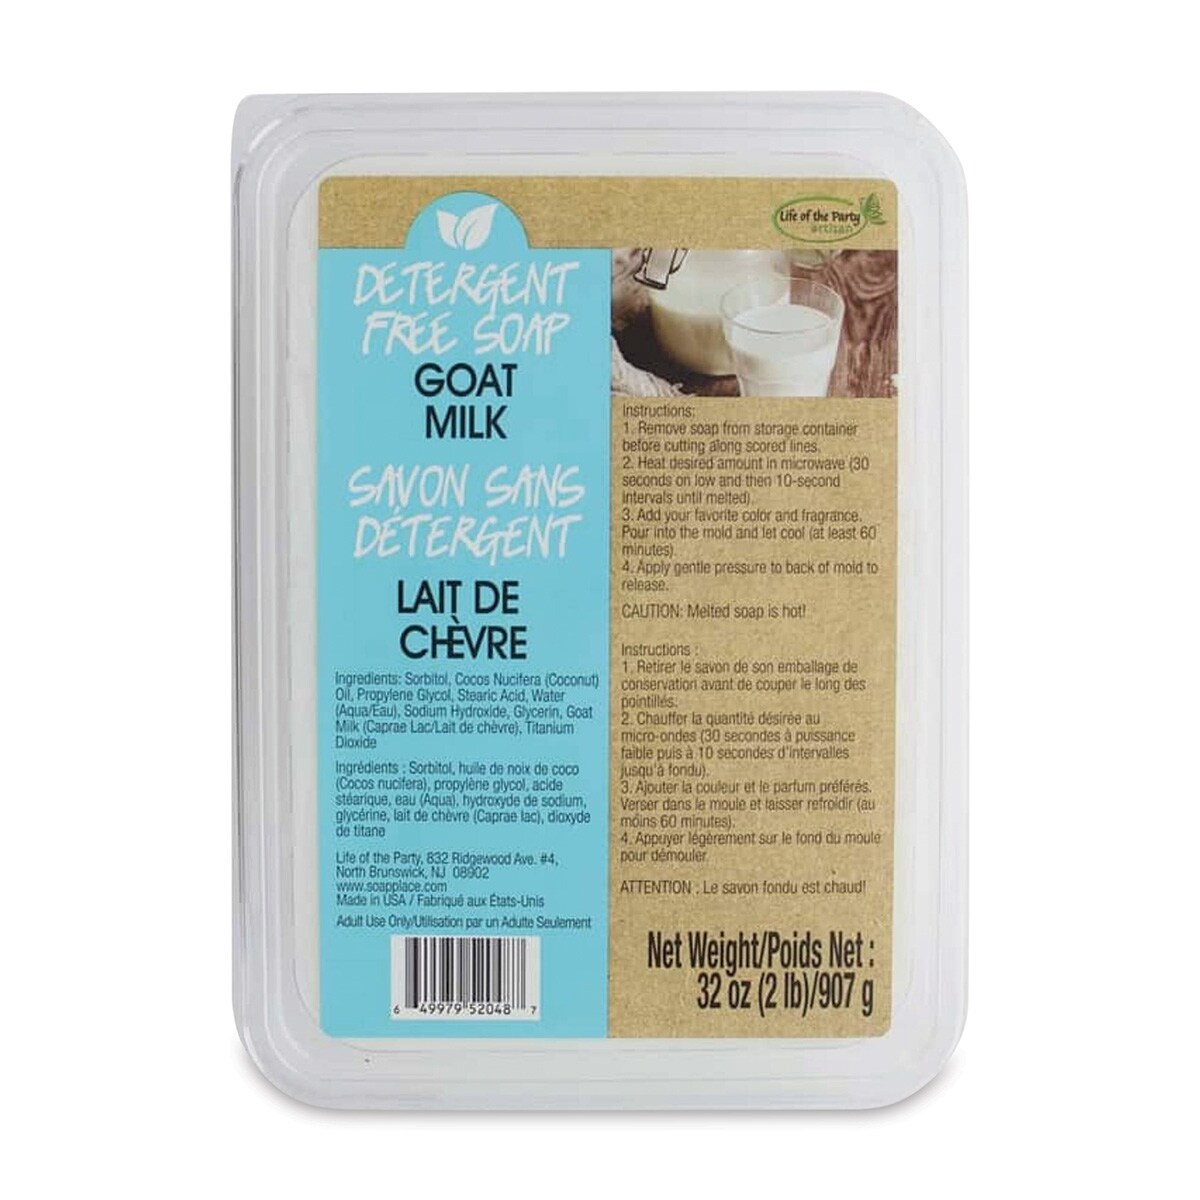 Life of the Party Detergent Free Soap Base - Goat Milk, 2 lb